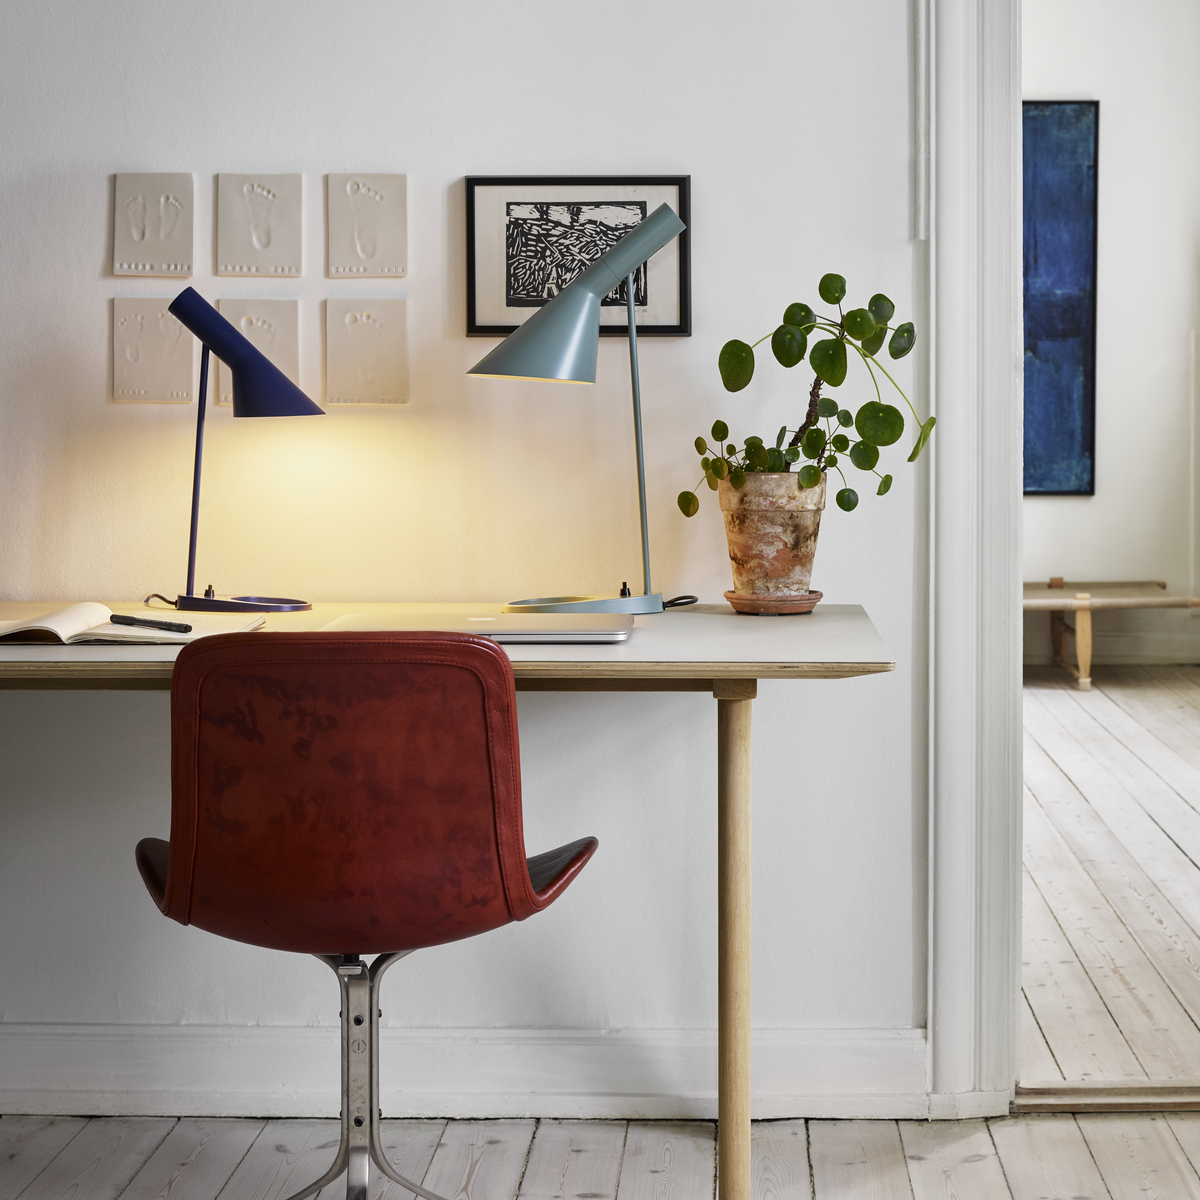 Two lit, angular desk lamps, one aqua and one navy, on white desk with plant.